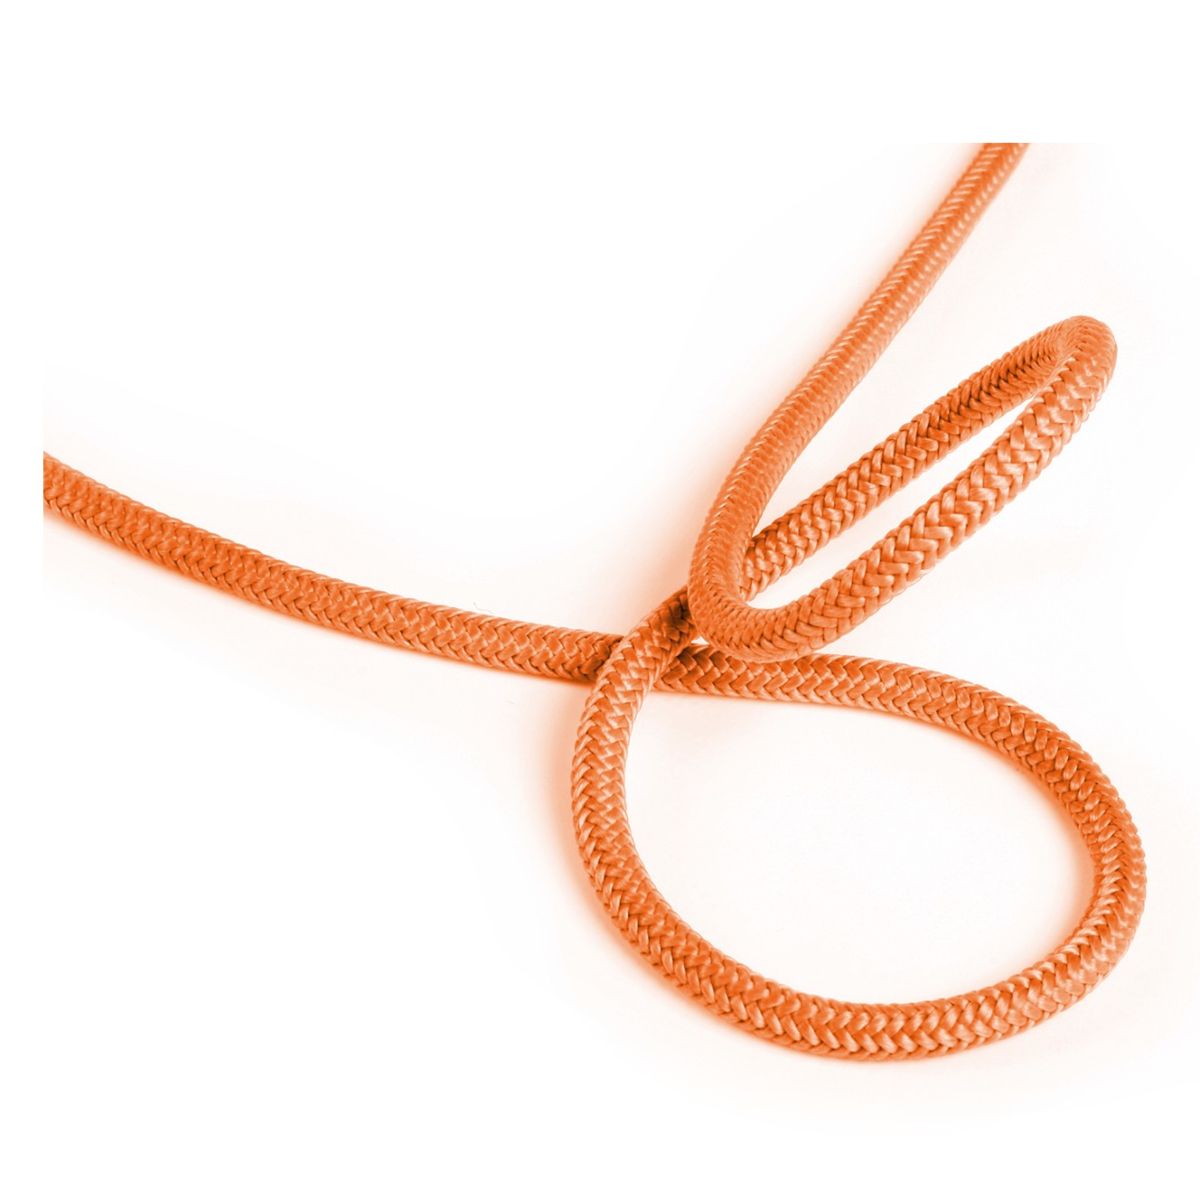 5 mm Accessory Cord 1 - By the Foot